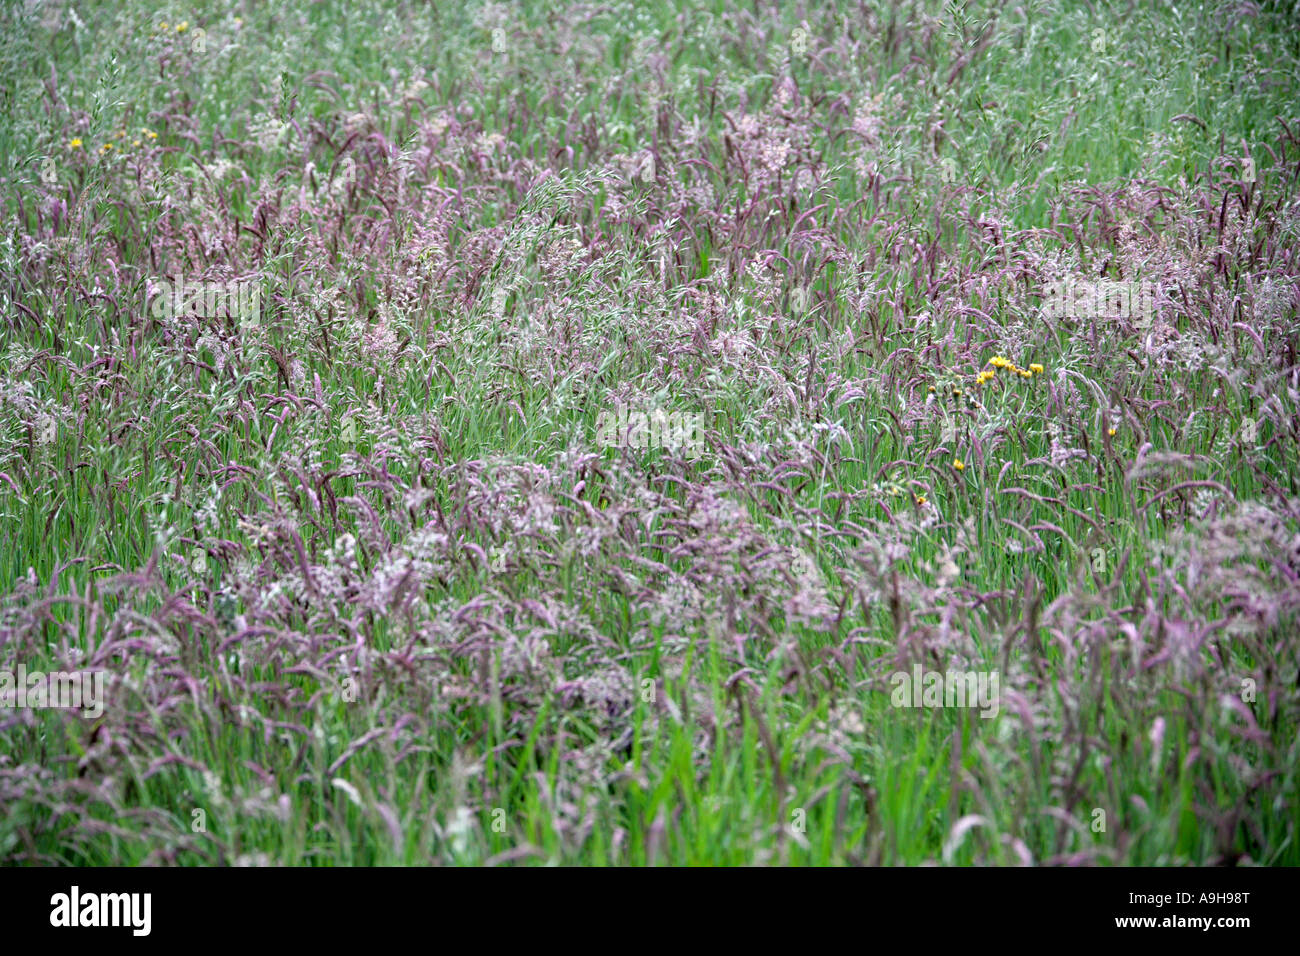 Meadow Grasses in Spring Stock Photo